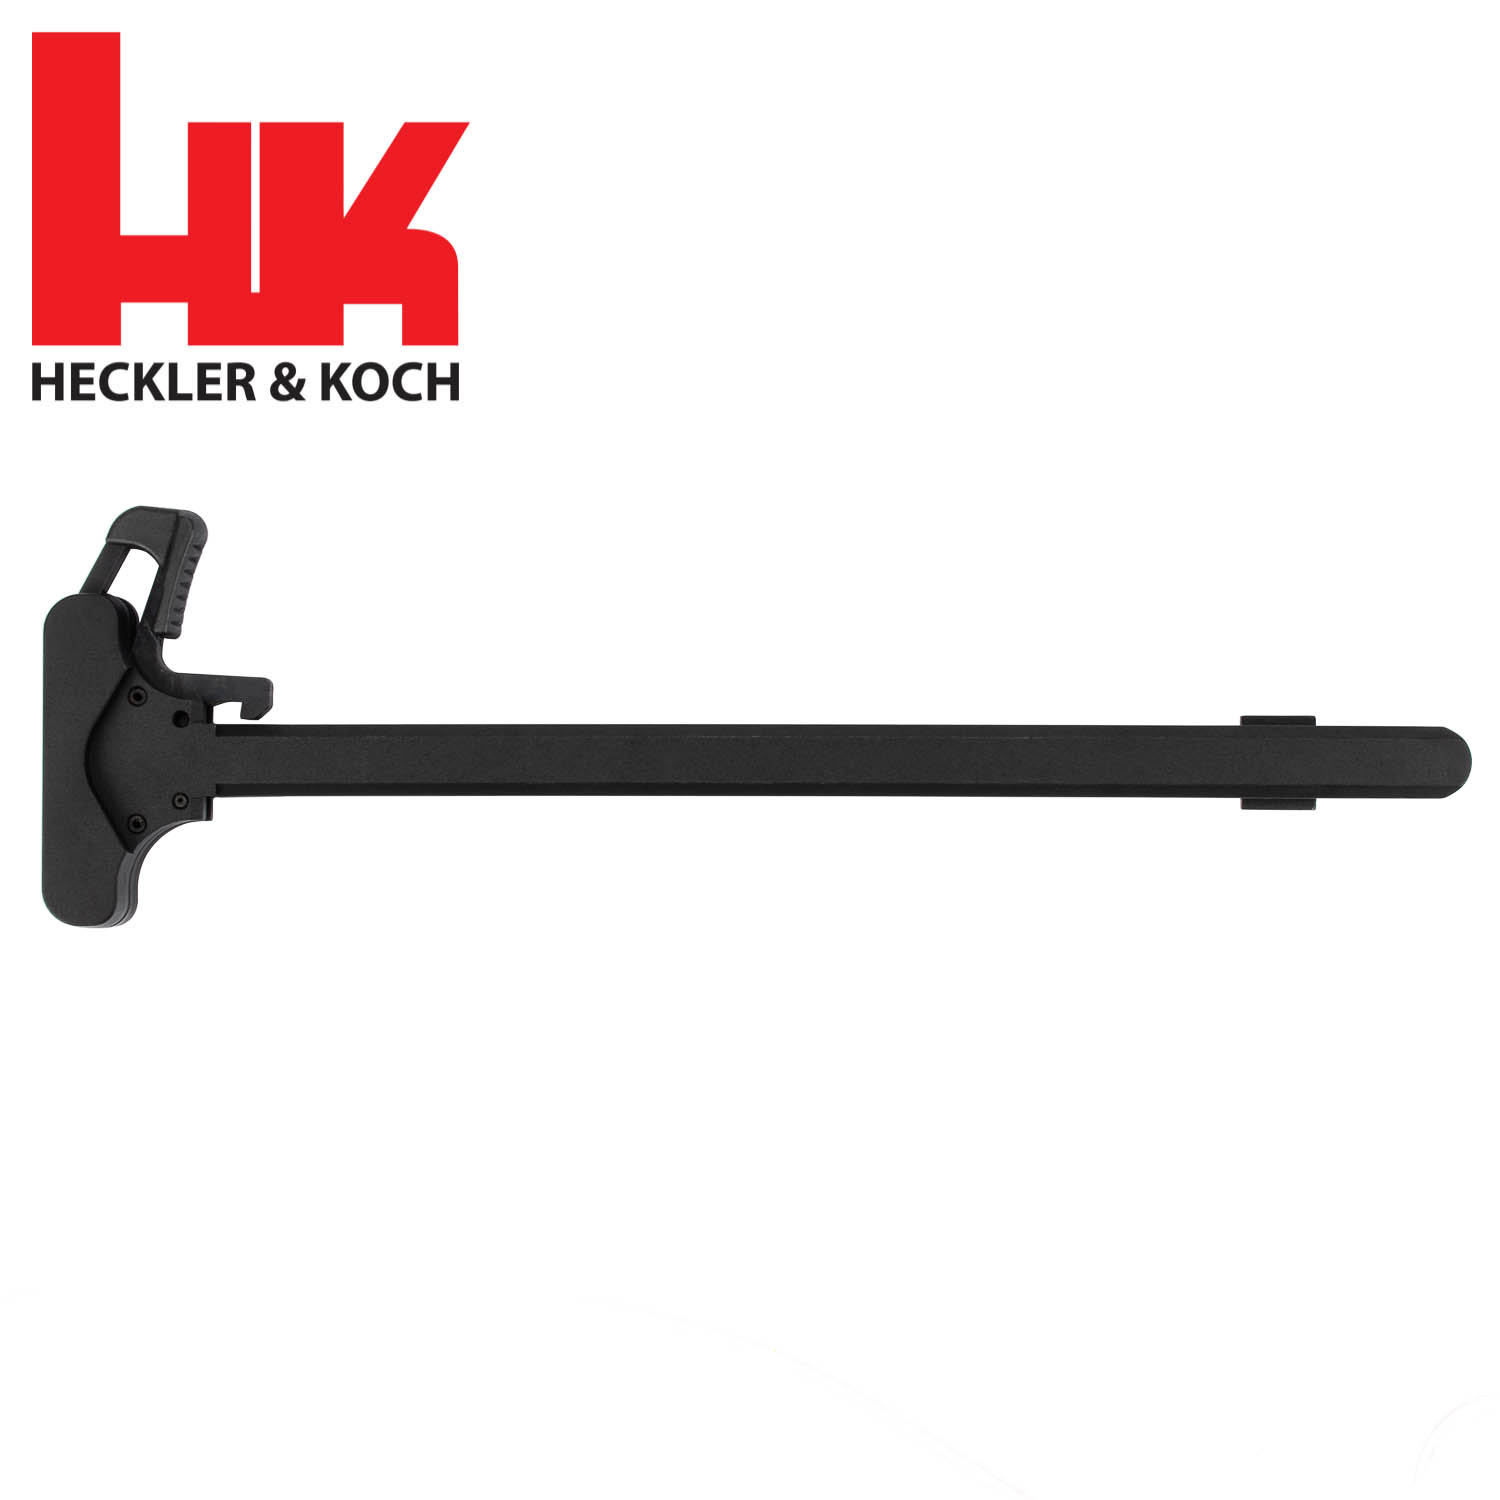 This complete charging handle is made of aluminum with a black finish, whil...